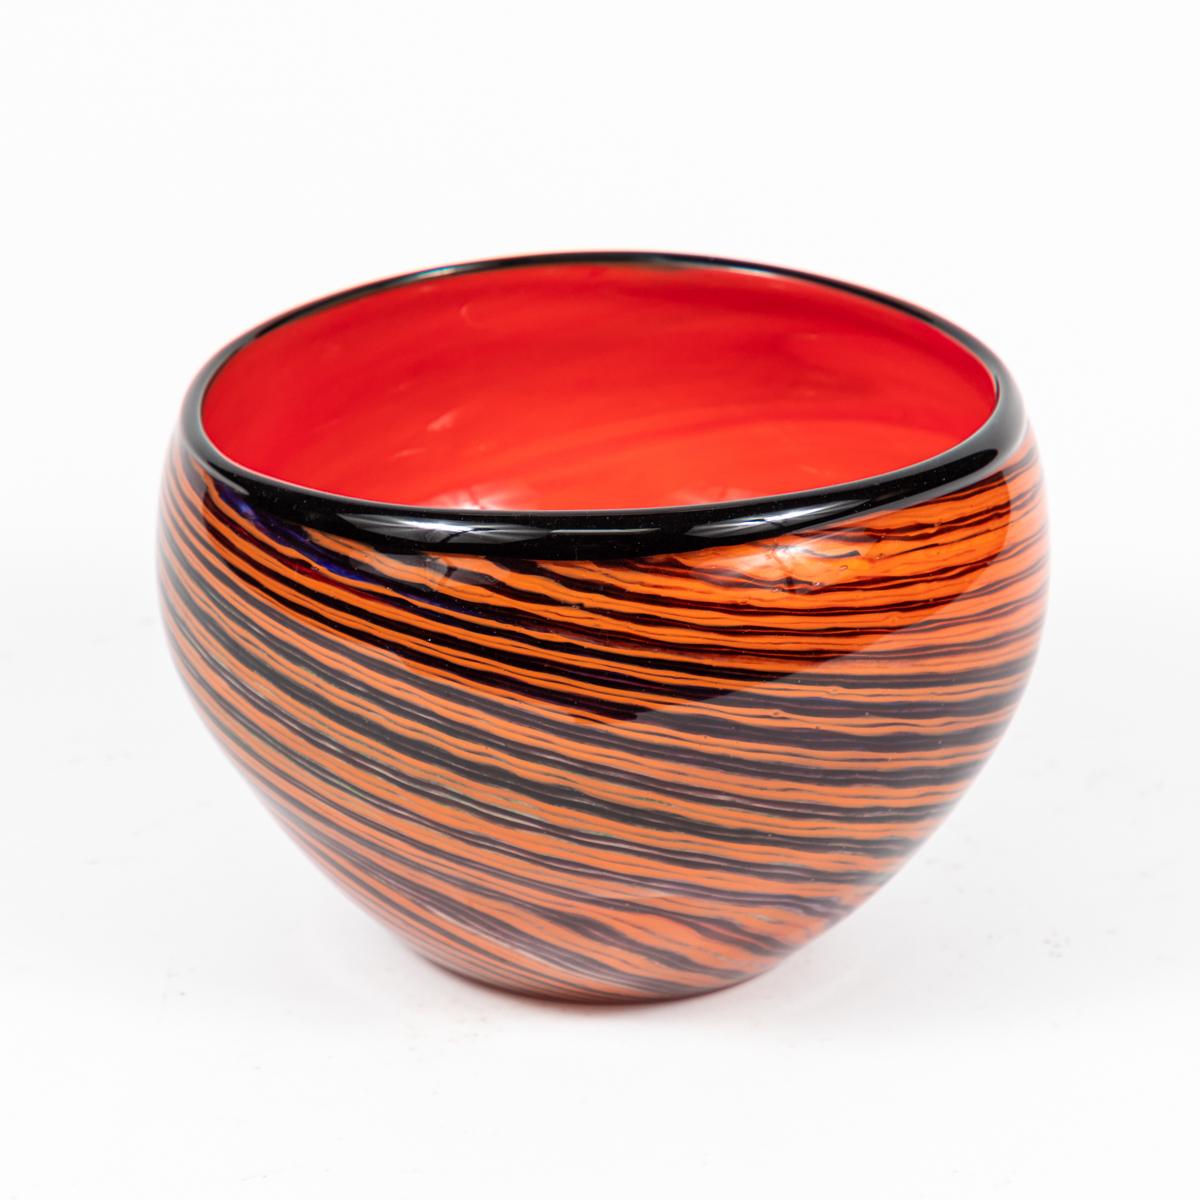 1950s English red and orange studio glass bowl wrapped in thin swirls of purple and black hand-painted stripes. Swank and psychedelic, this midcentury vessel is evocative of Murano glass. The multi-dimensional pattern is hypnotizing, the glossy